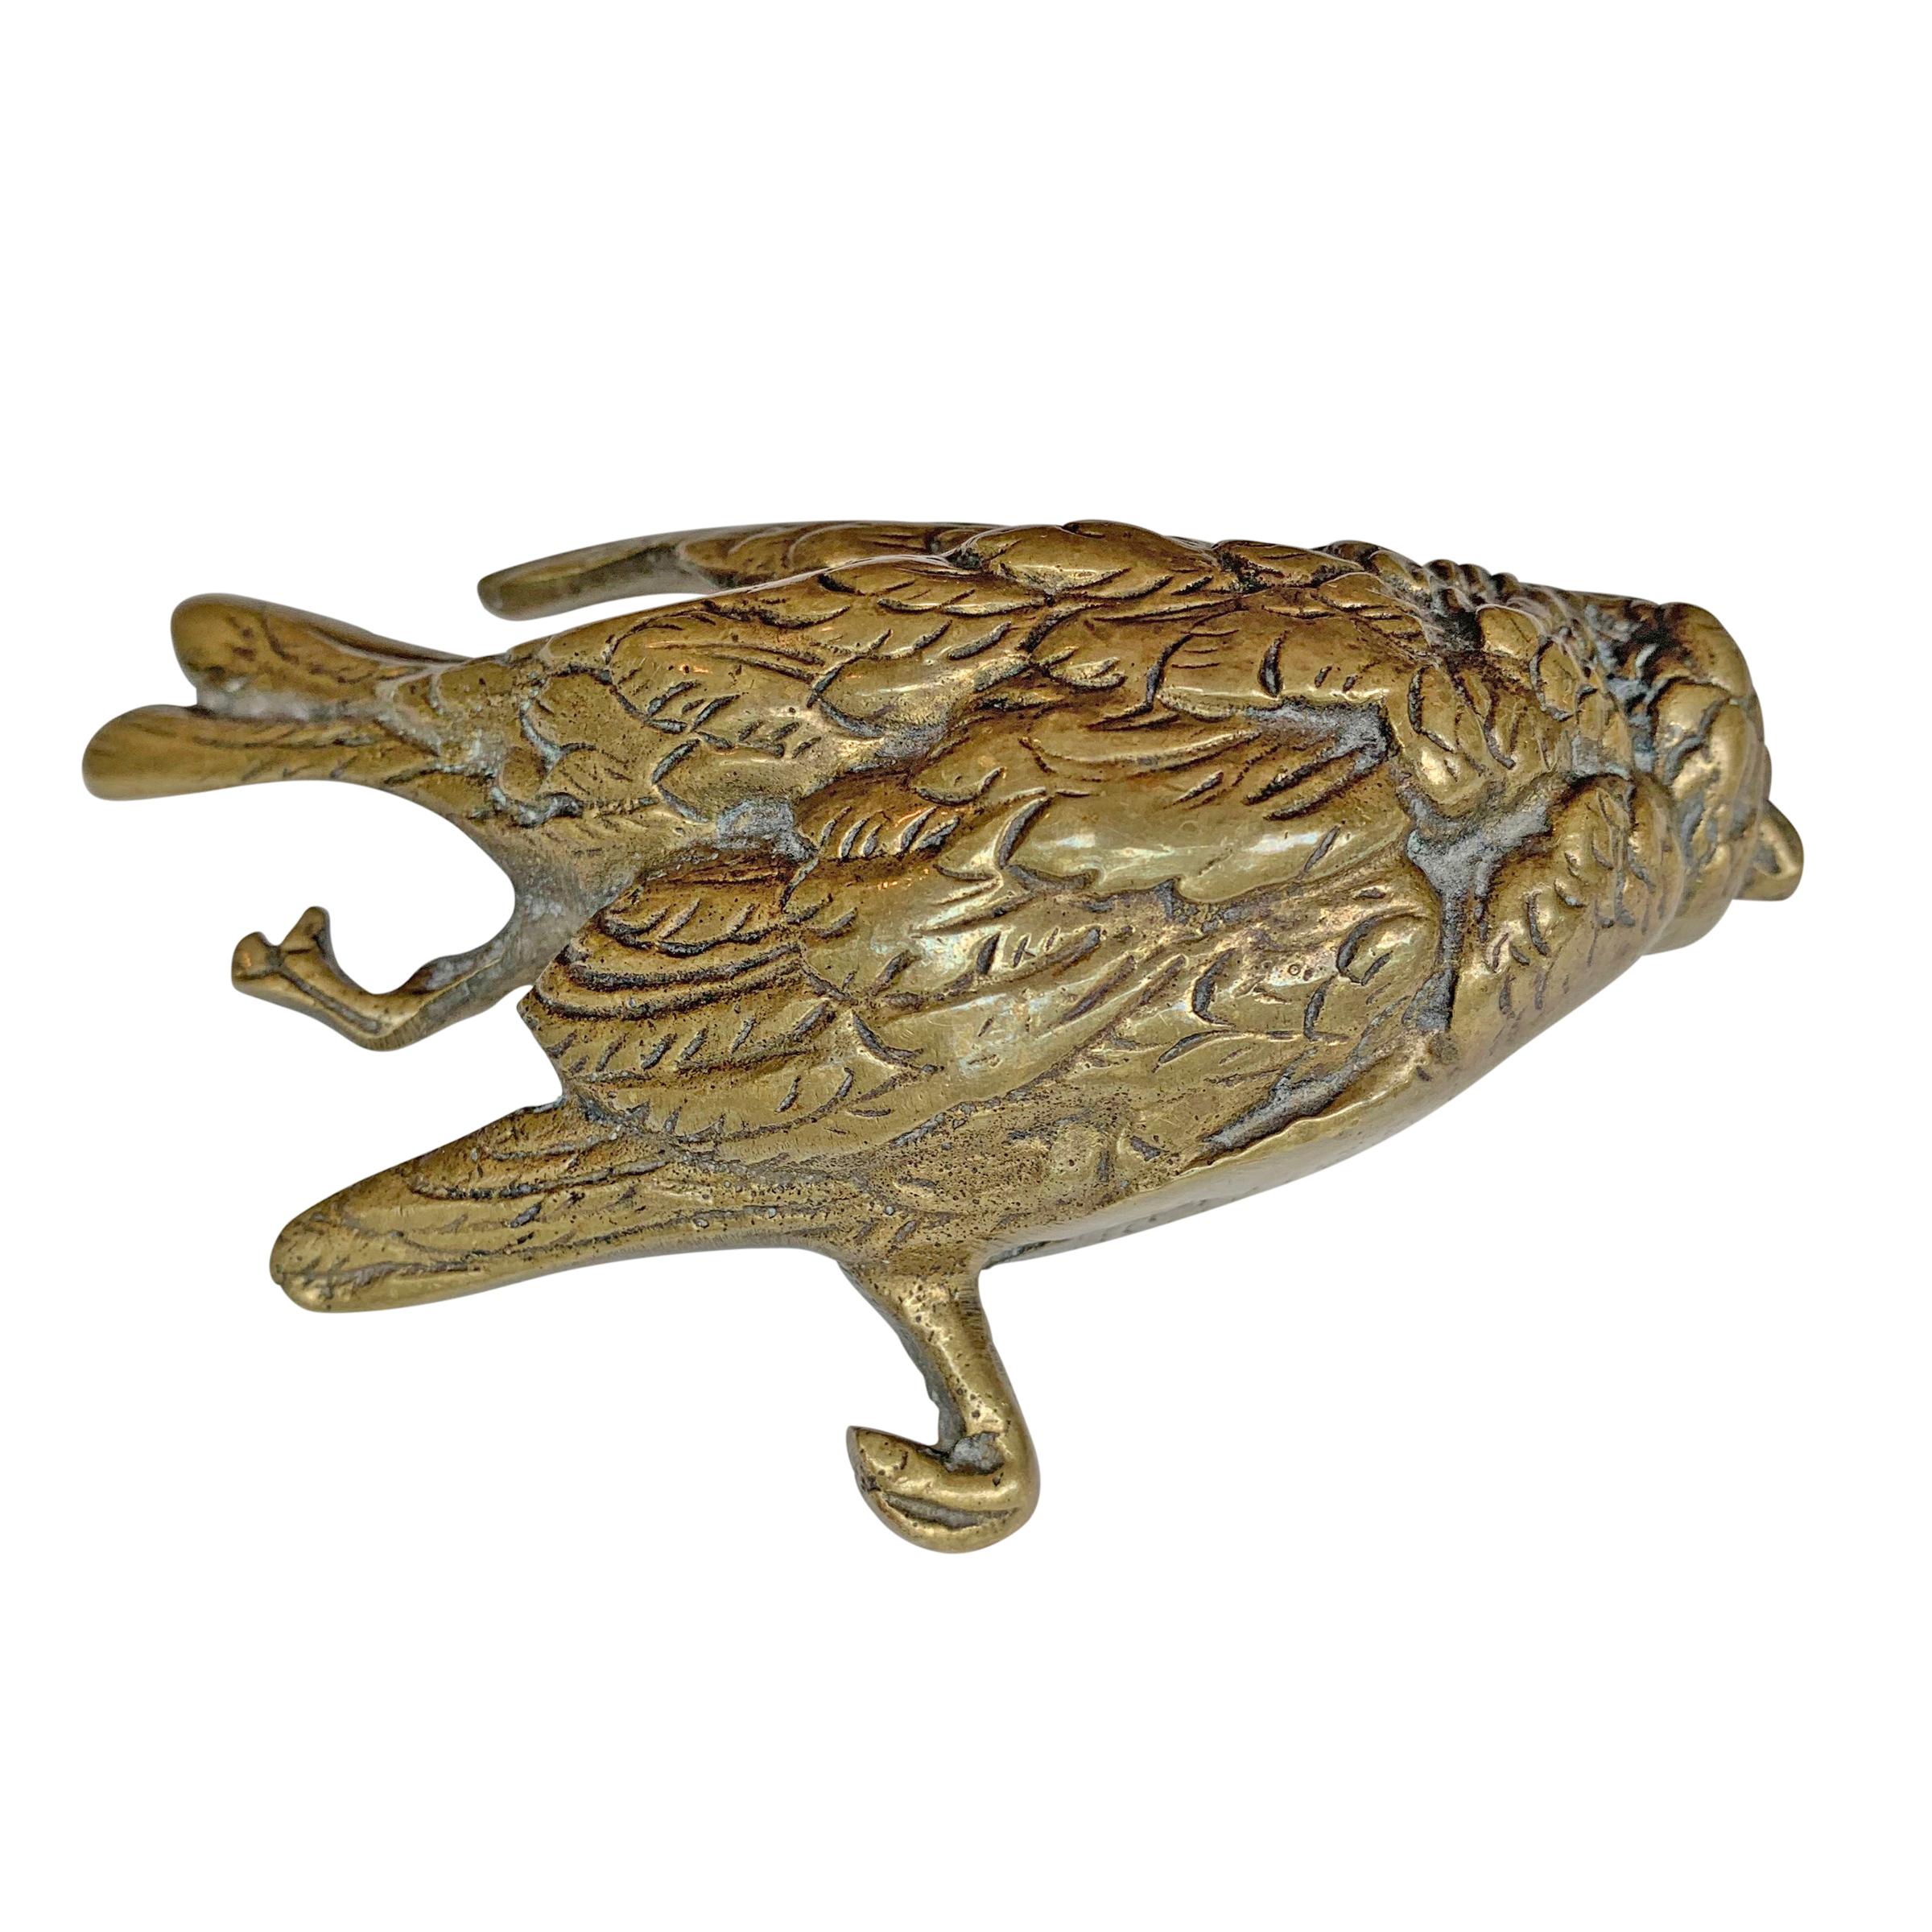 A fantastic and macabre 19th century English cast bronze dead sparrow objet d'art. In Victorian England dead sparrows were a reminder of one's mortality and to live a just and honest life. These beliefs ultimately led dead birds to symbolize good